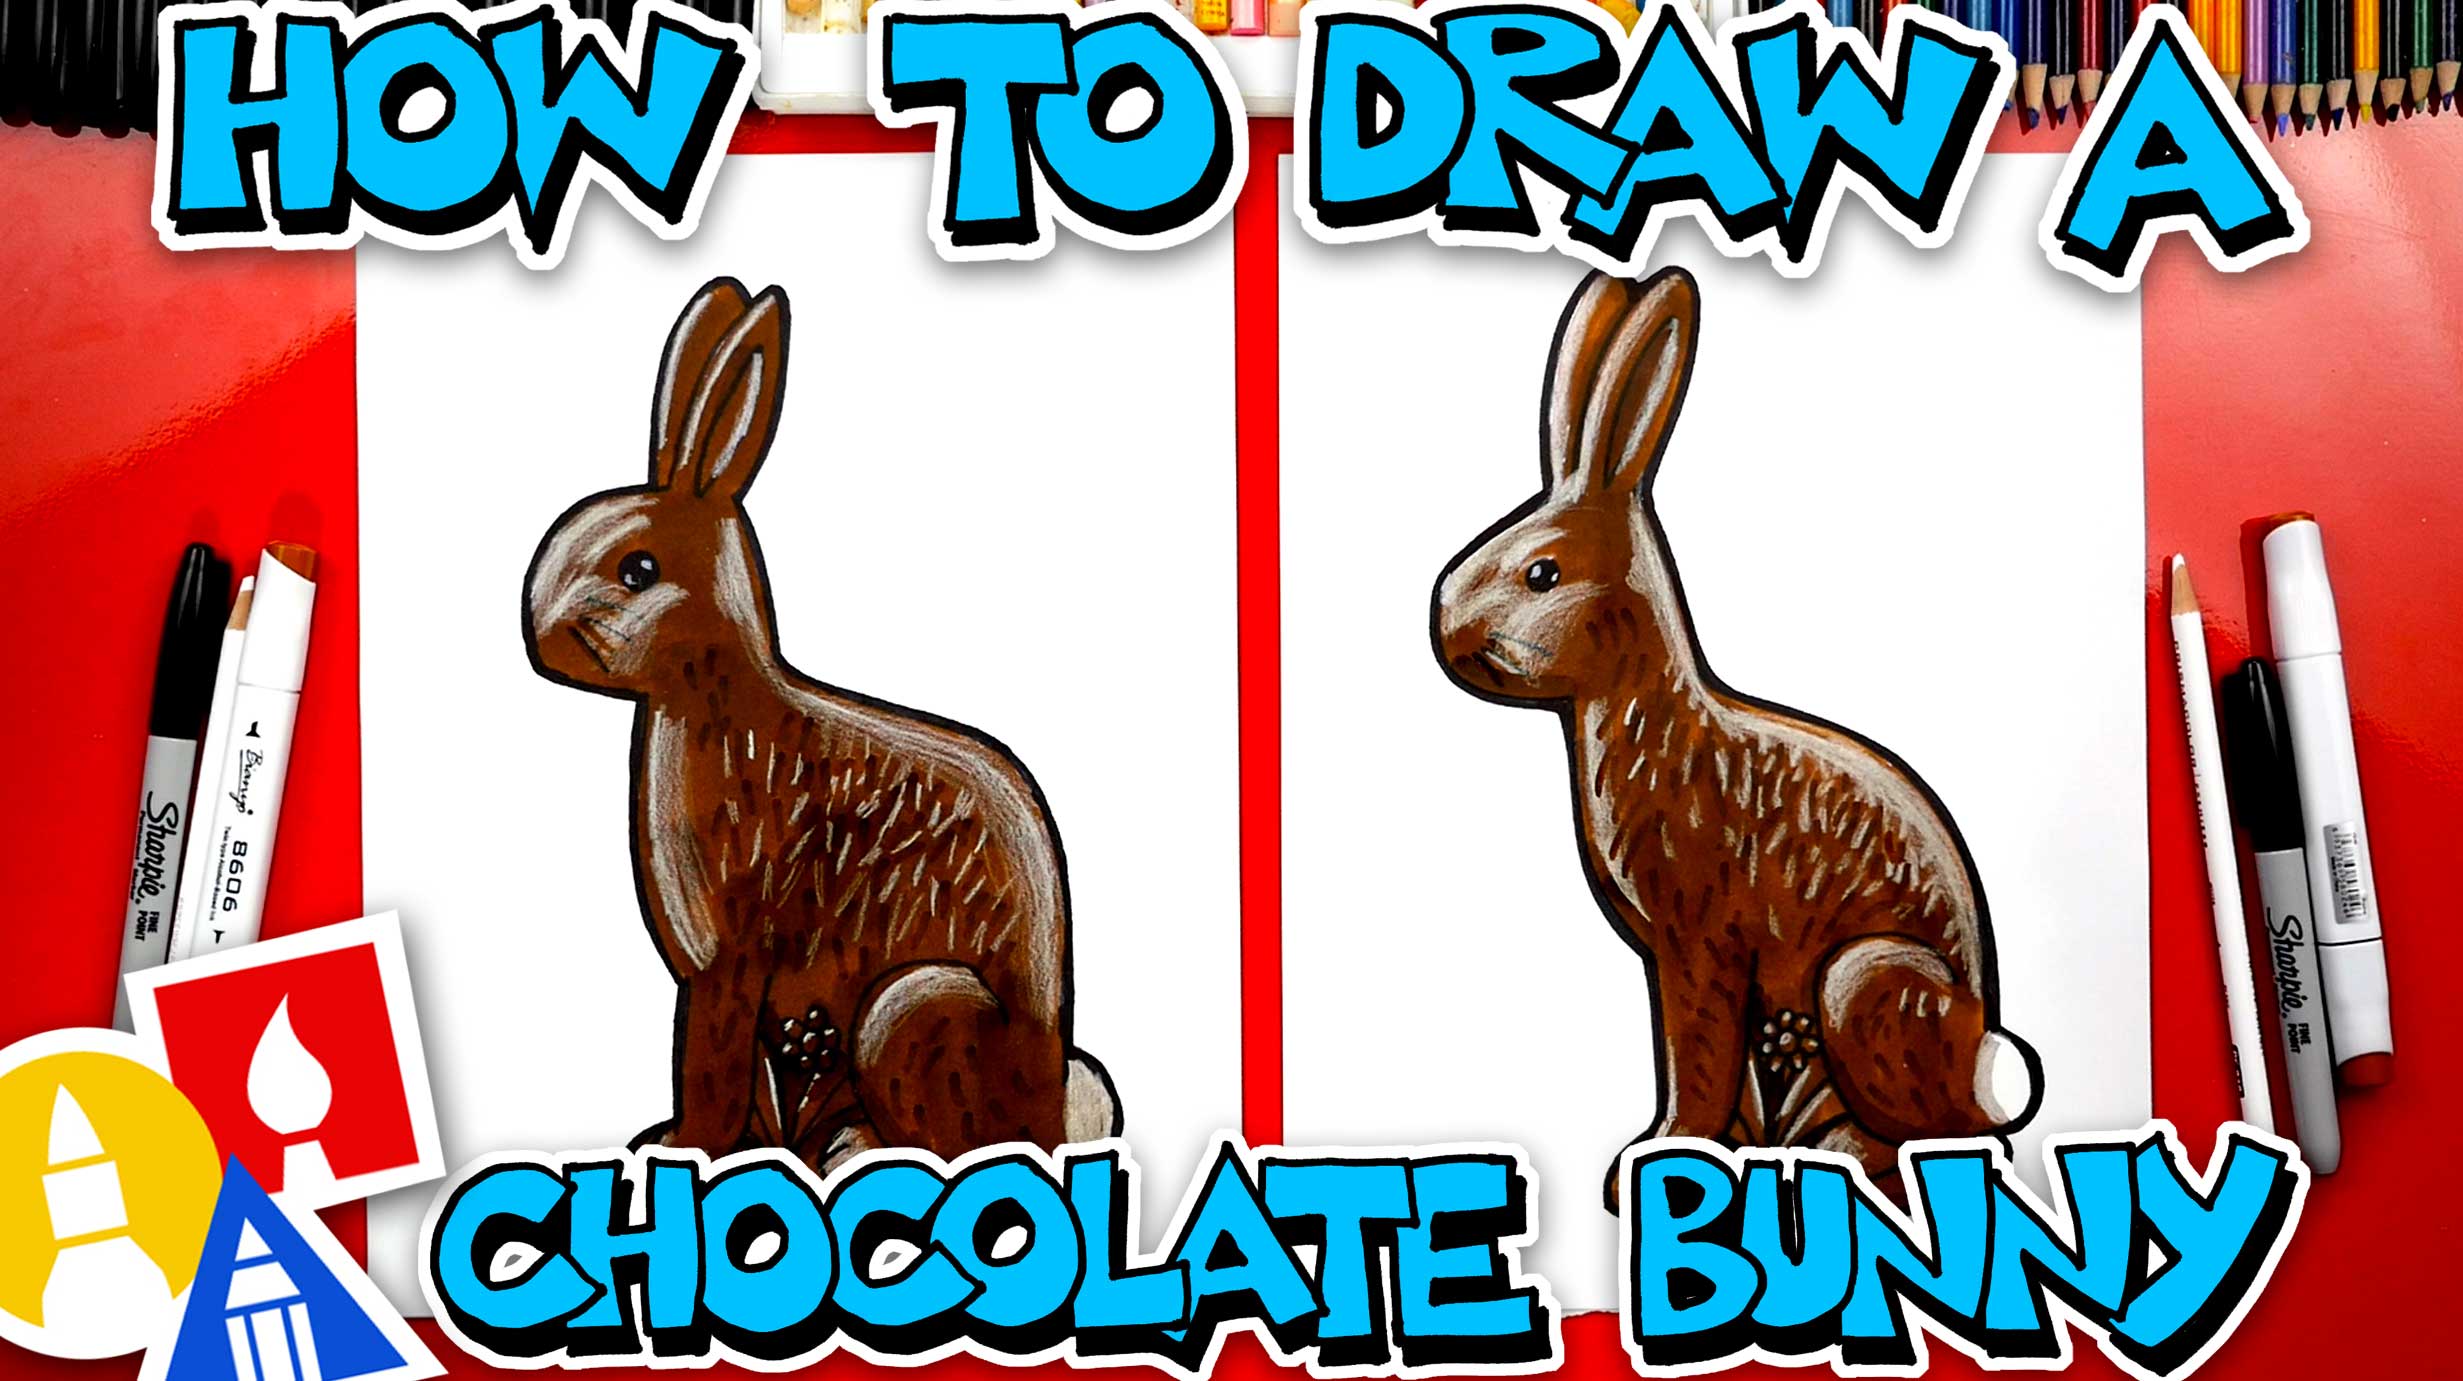 Download How To Draw A Chocolate Easter Bunny - Art For Kids Hub